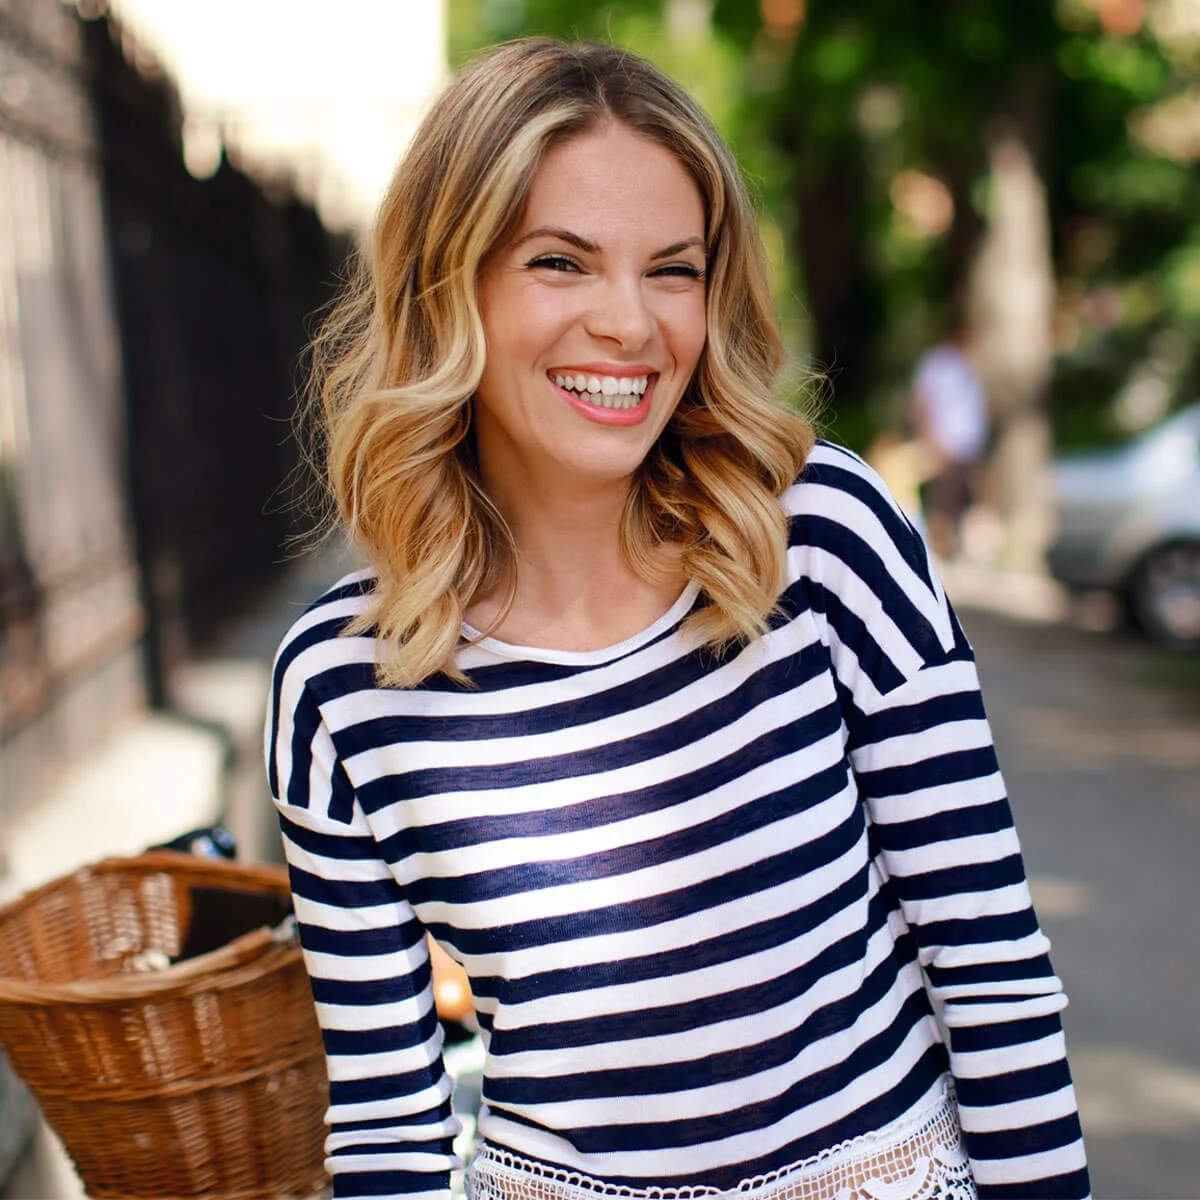 A woman in striped shirt standing on sidewalk next to basket.